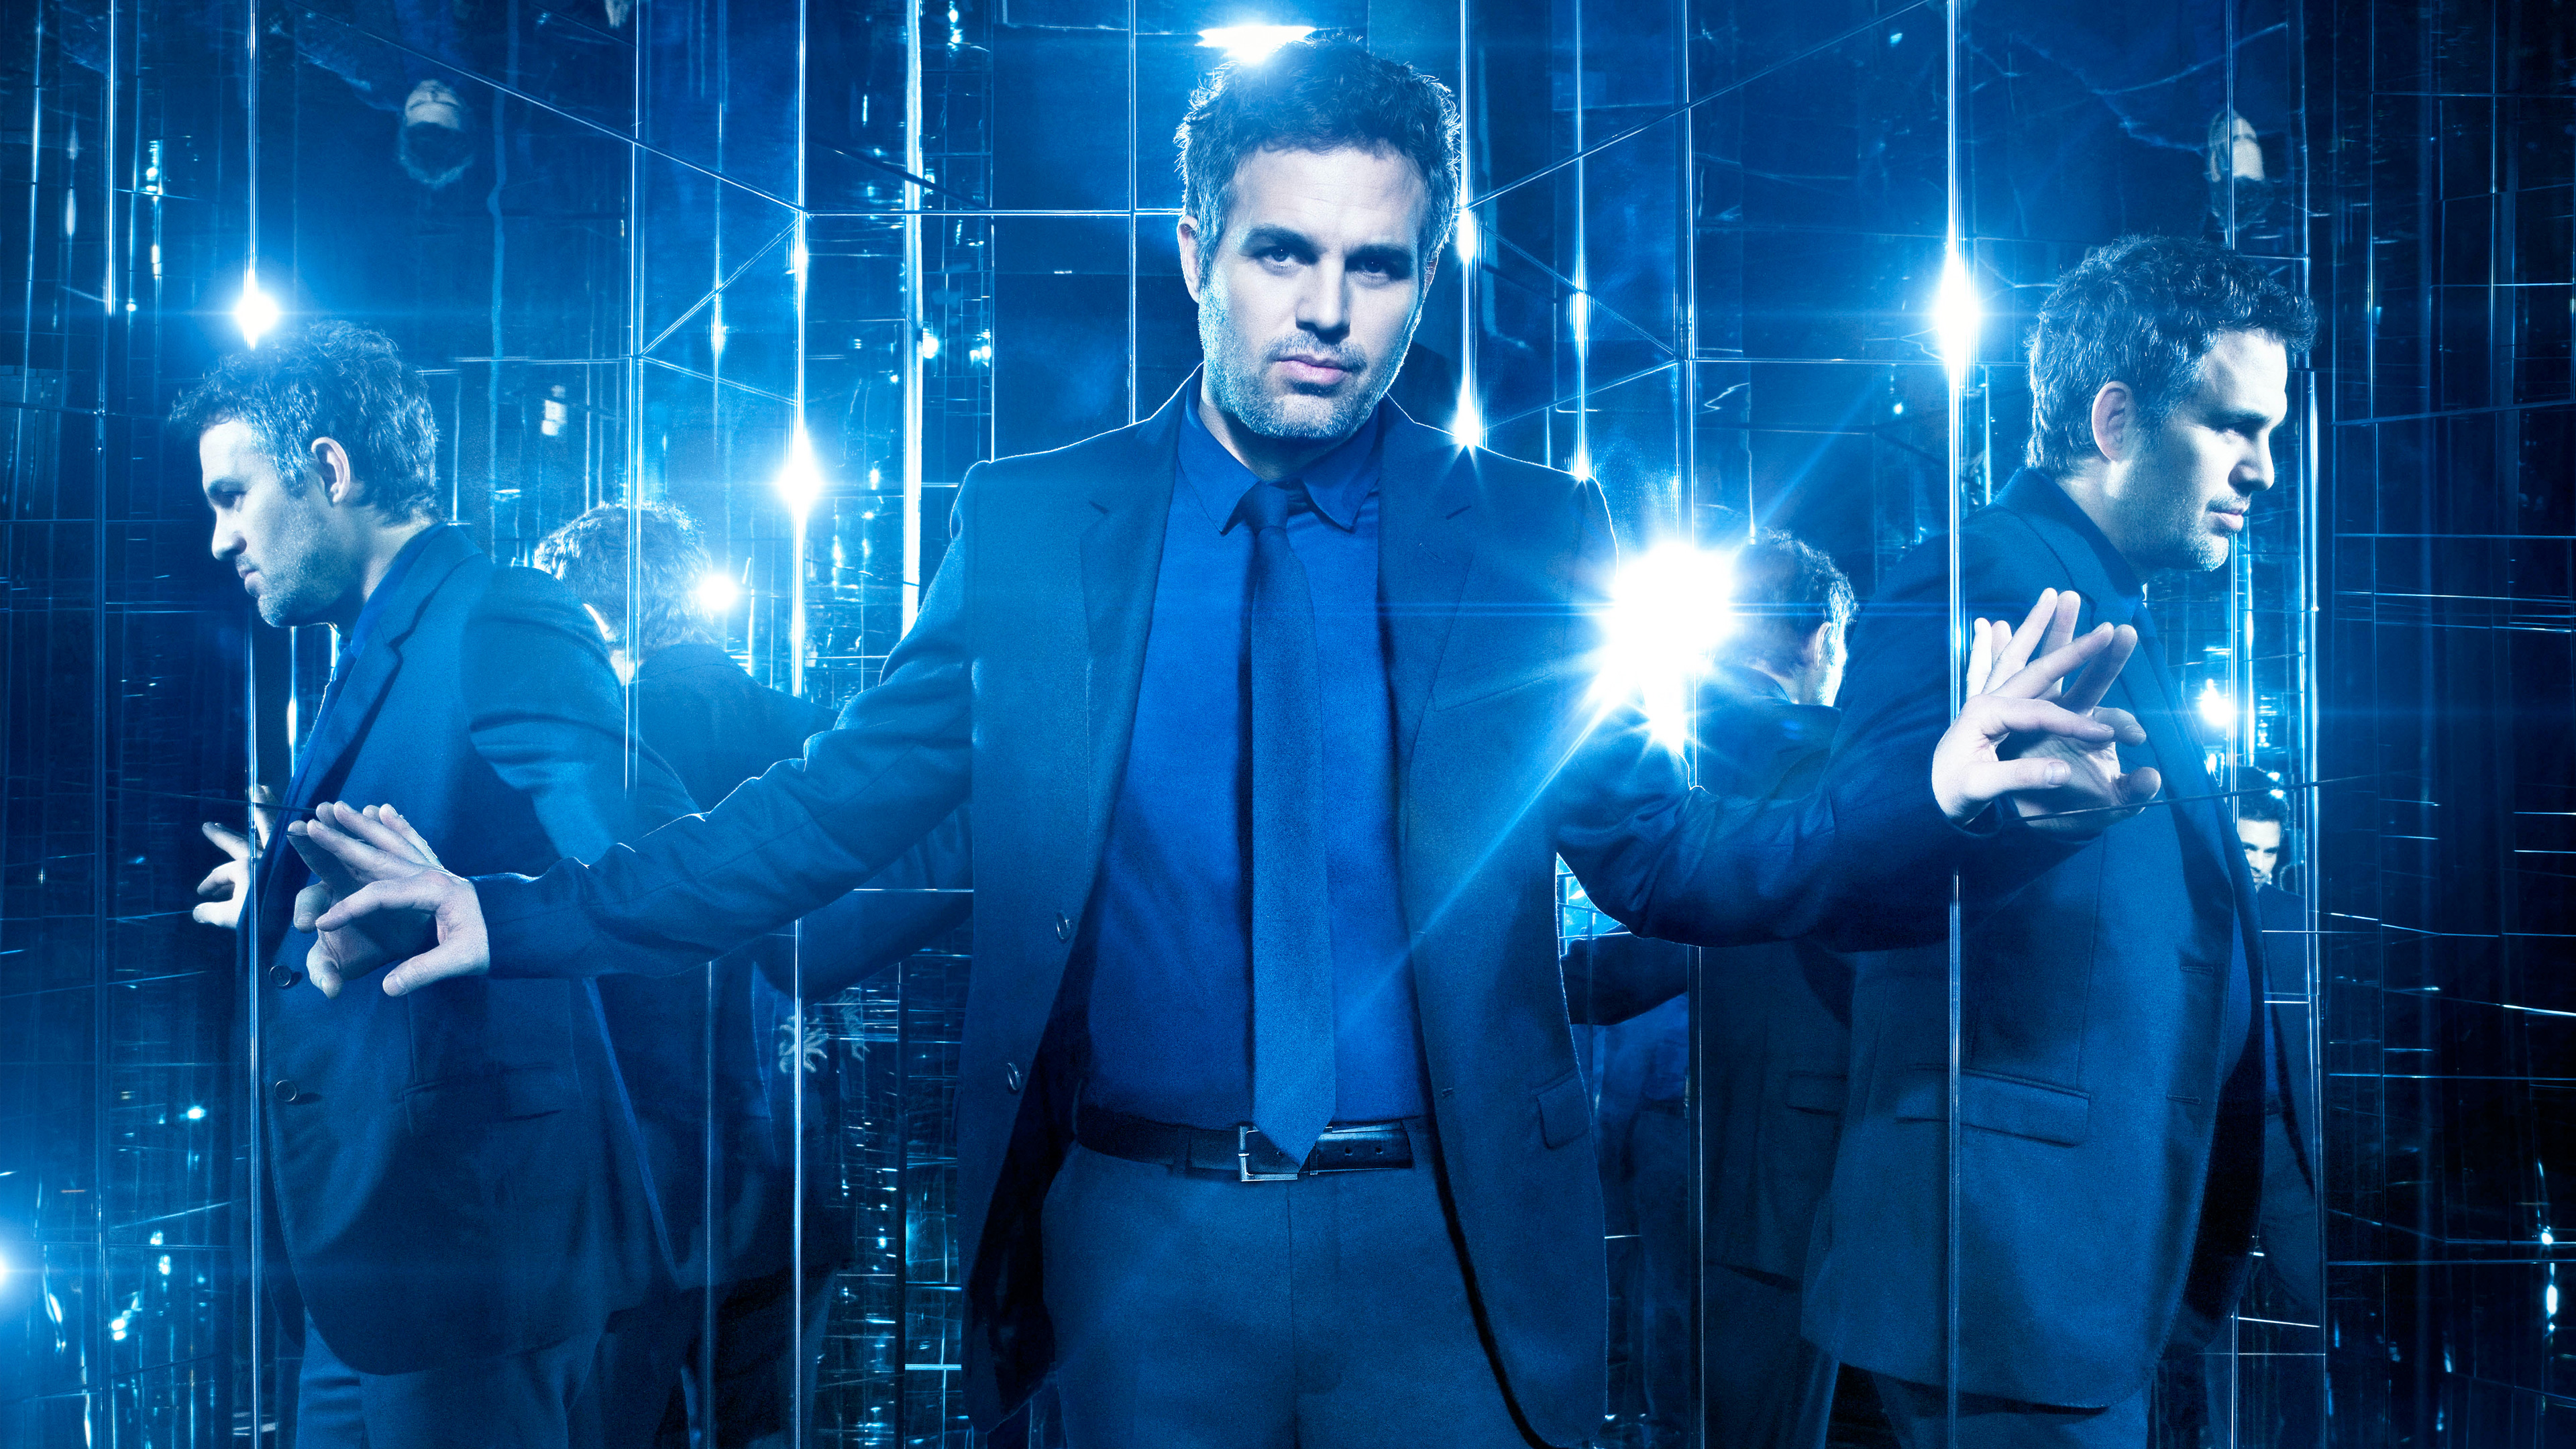 now you see me wallpaper,electric blue,suit,performance,photography,movie